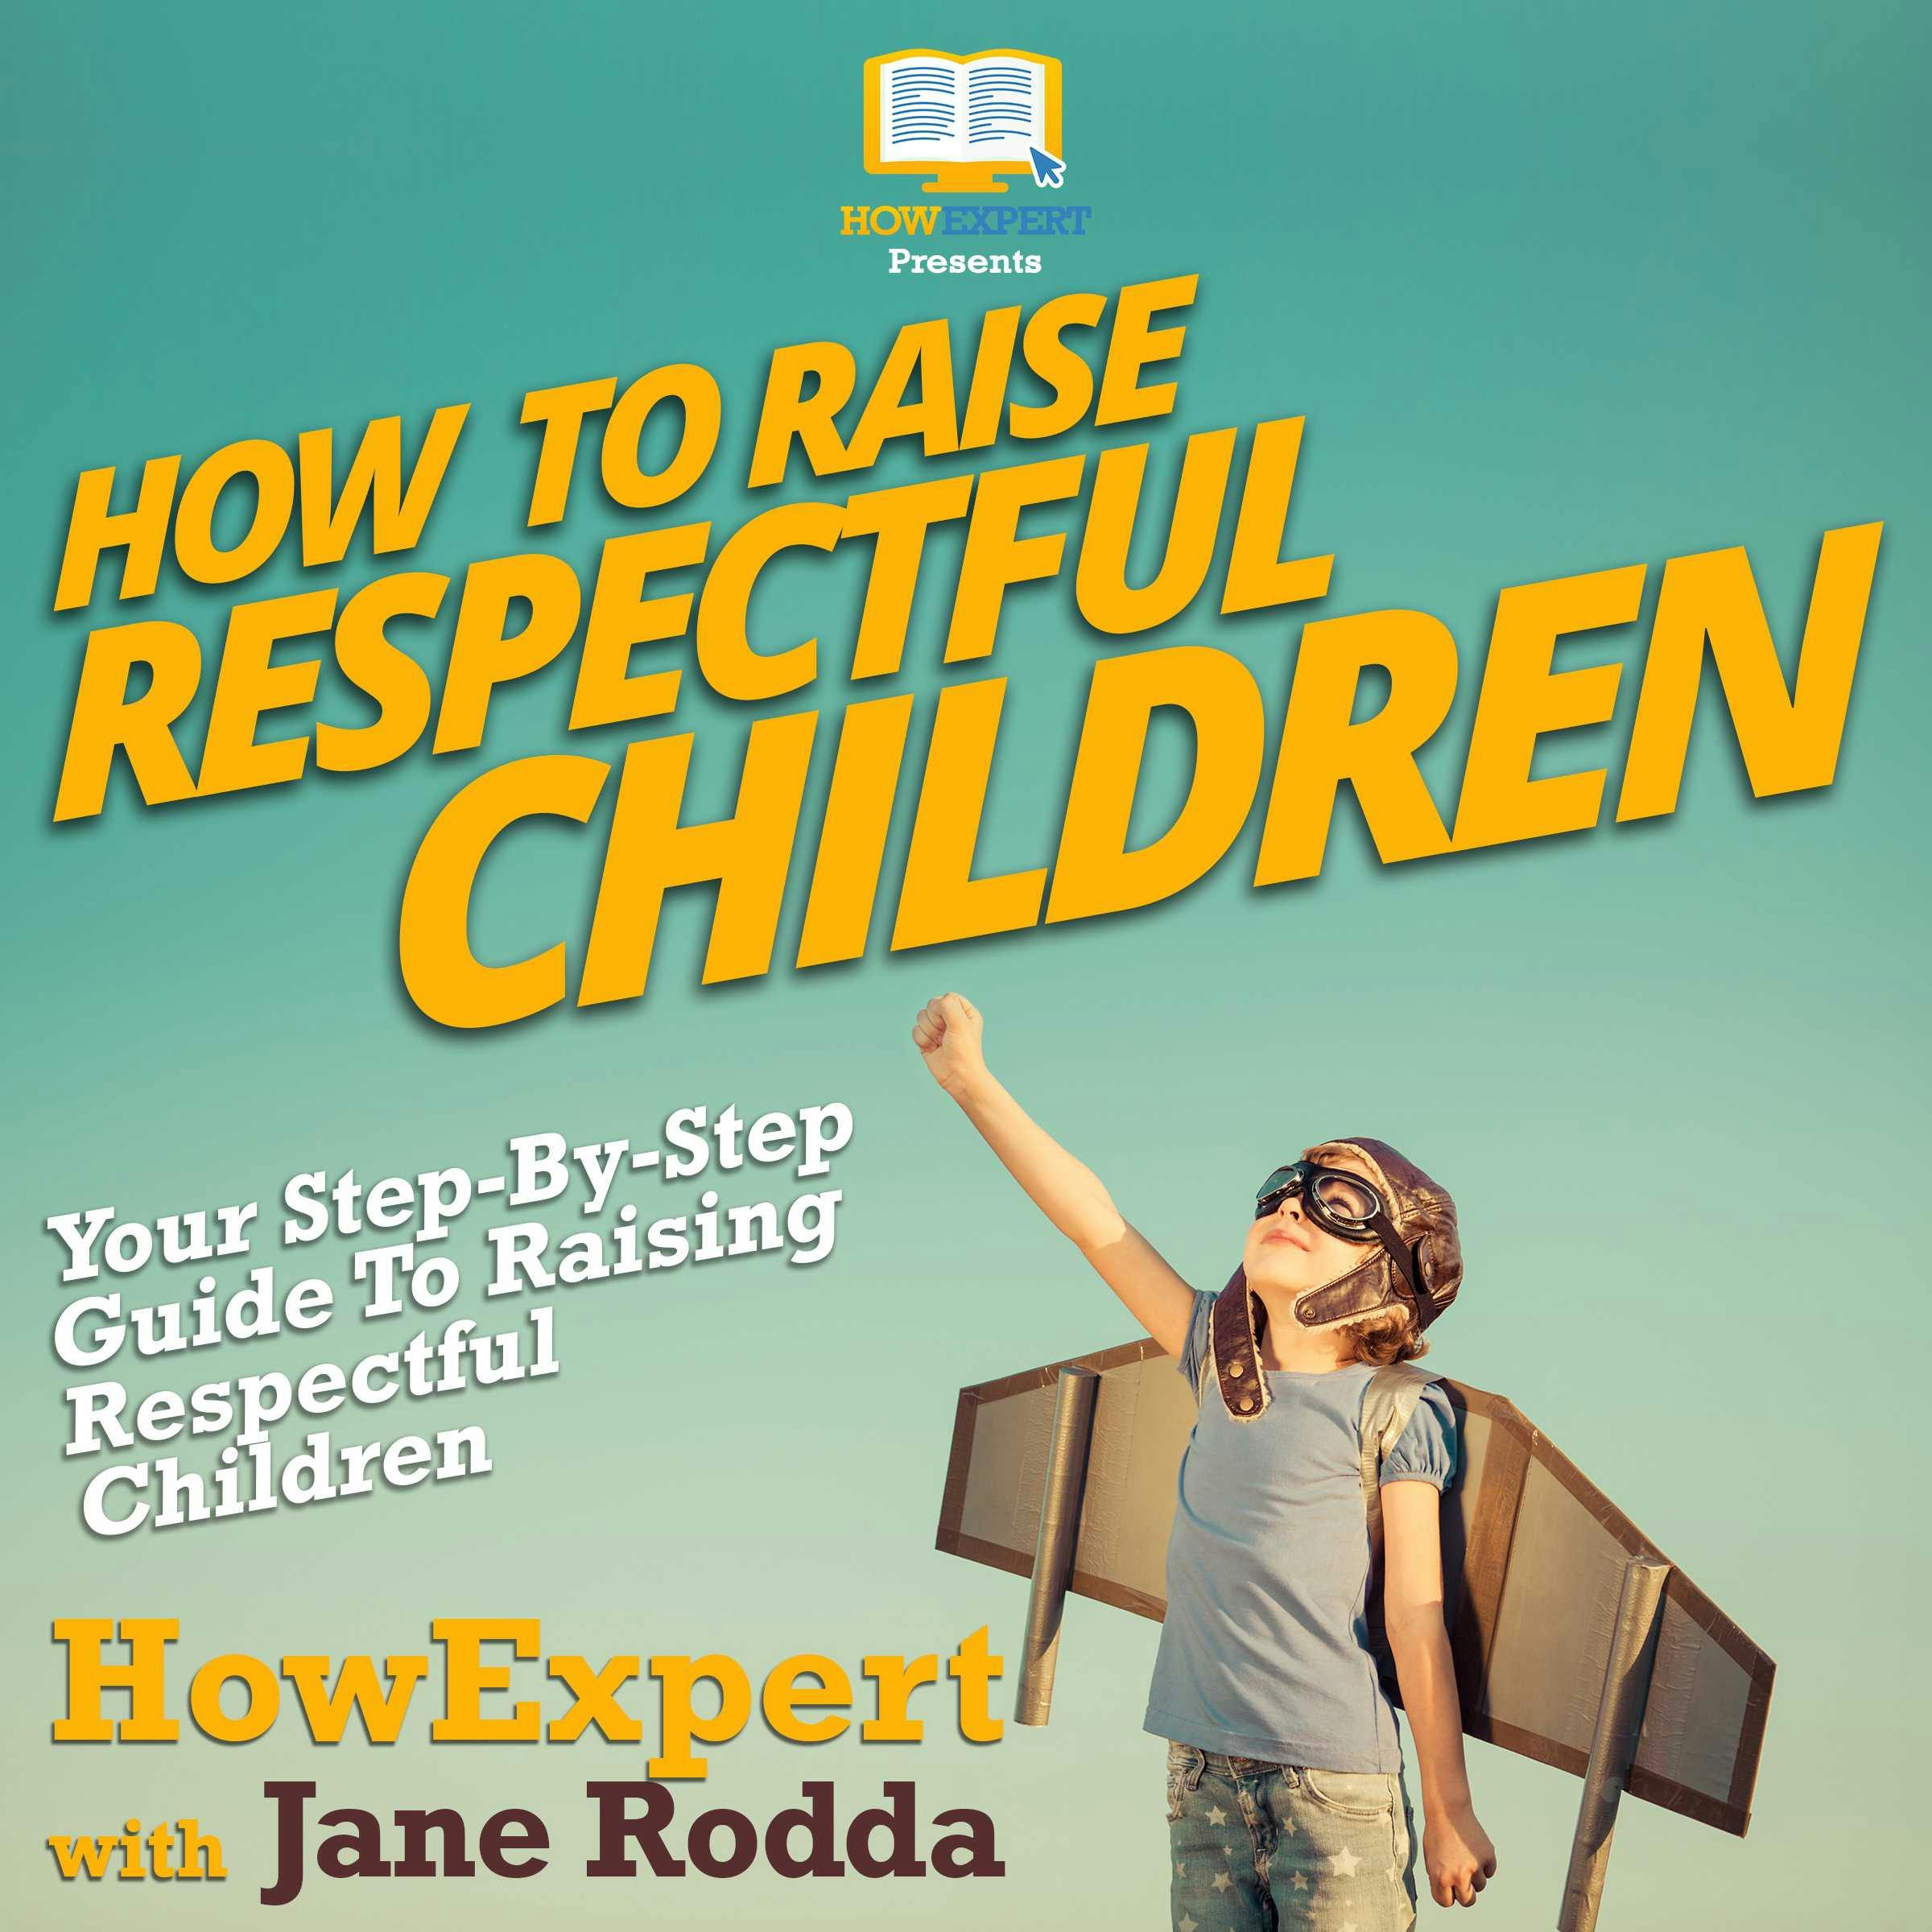 How To Raise Respectful Children: Your Step By Step Guide To Raising Respectful Children - Jane Rodda, HowExpert